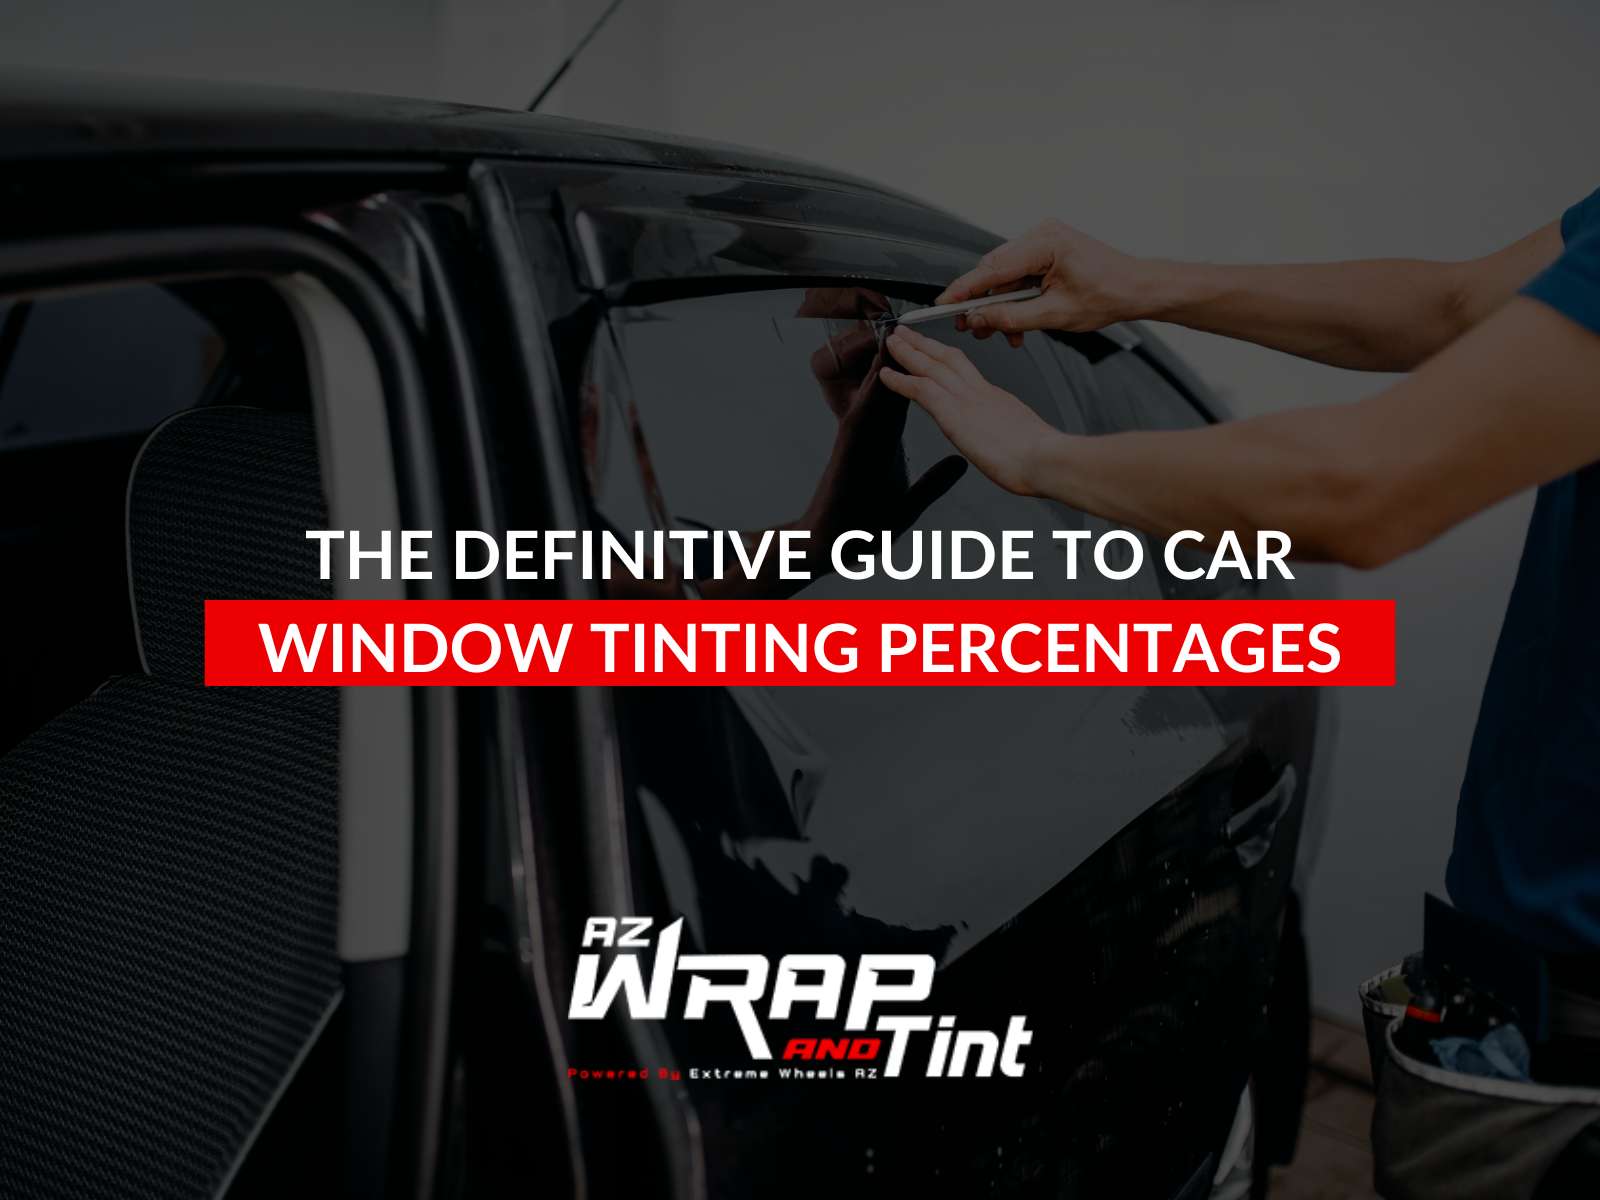 The Definitive Guide To Car Window Tinting Percentages